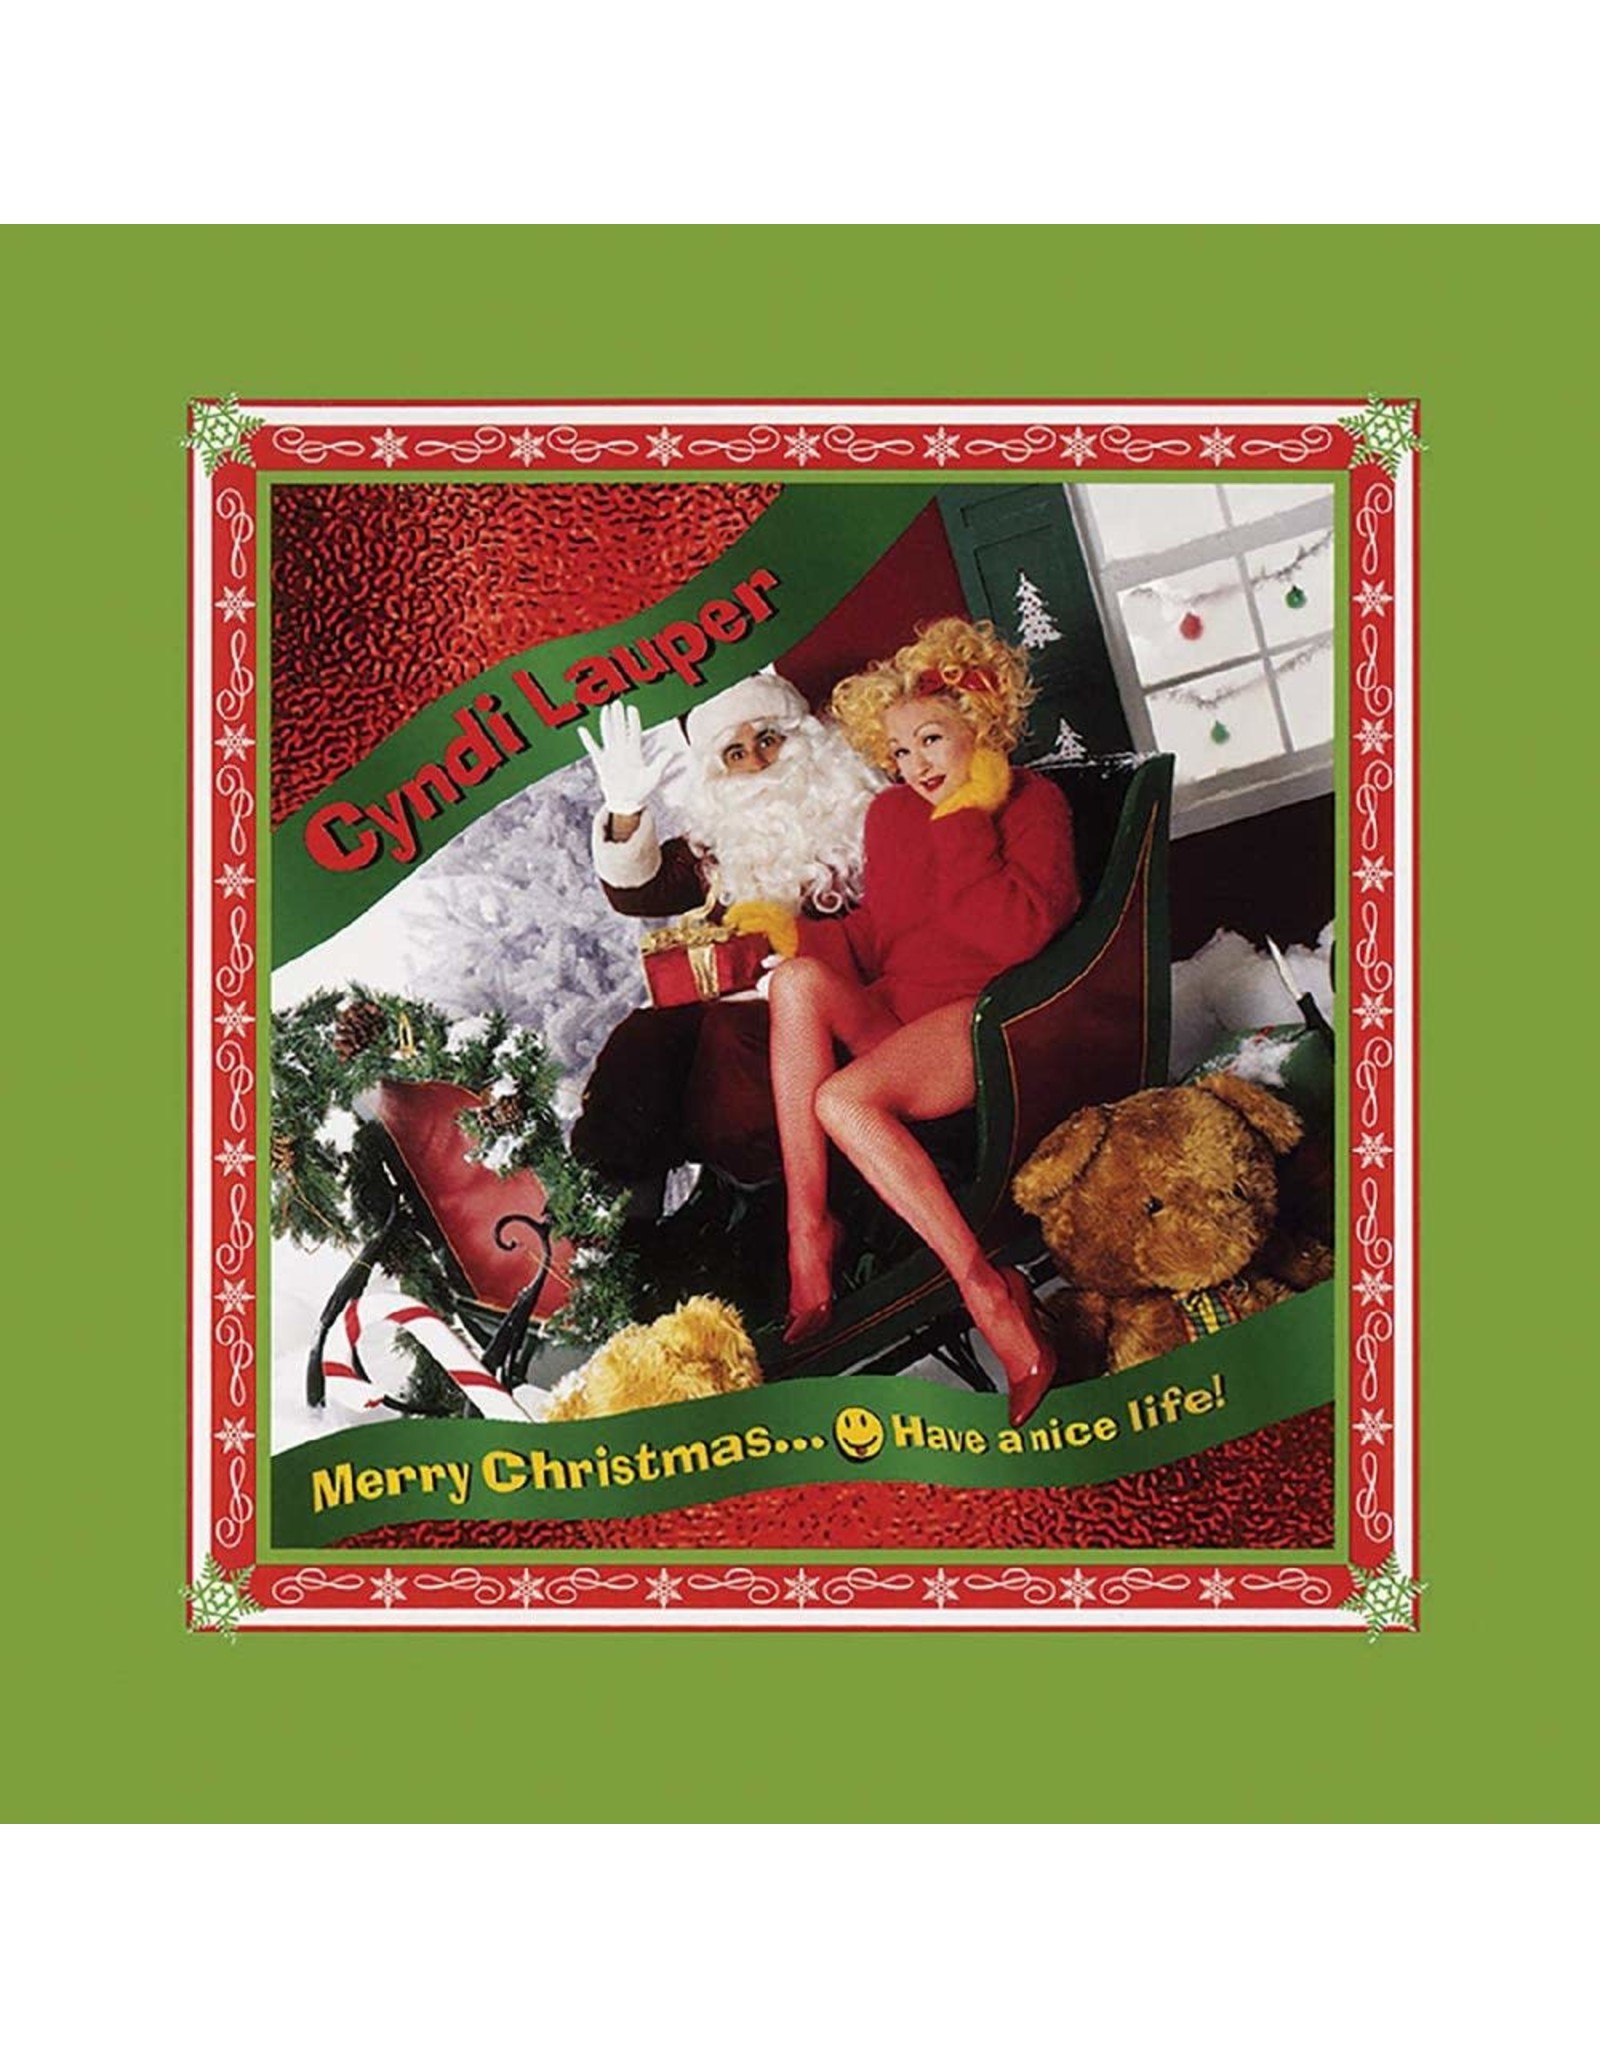 Cyndi Lauper - Merry Christmas, Have A Nice Life! (Candy Cane Vinyl)